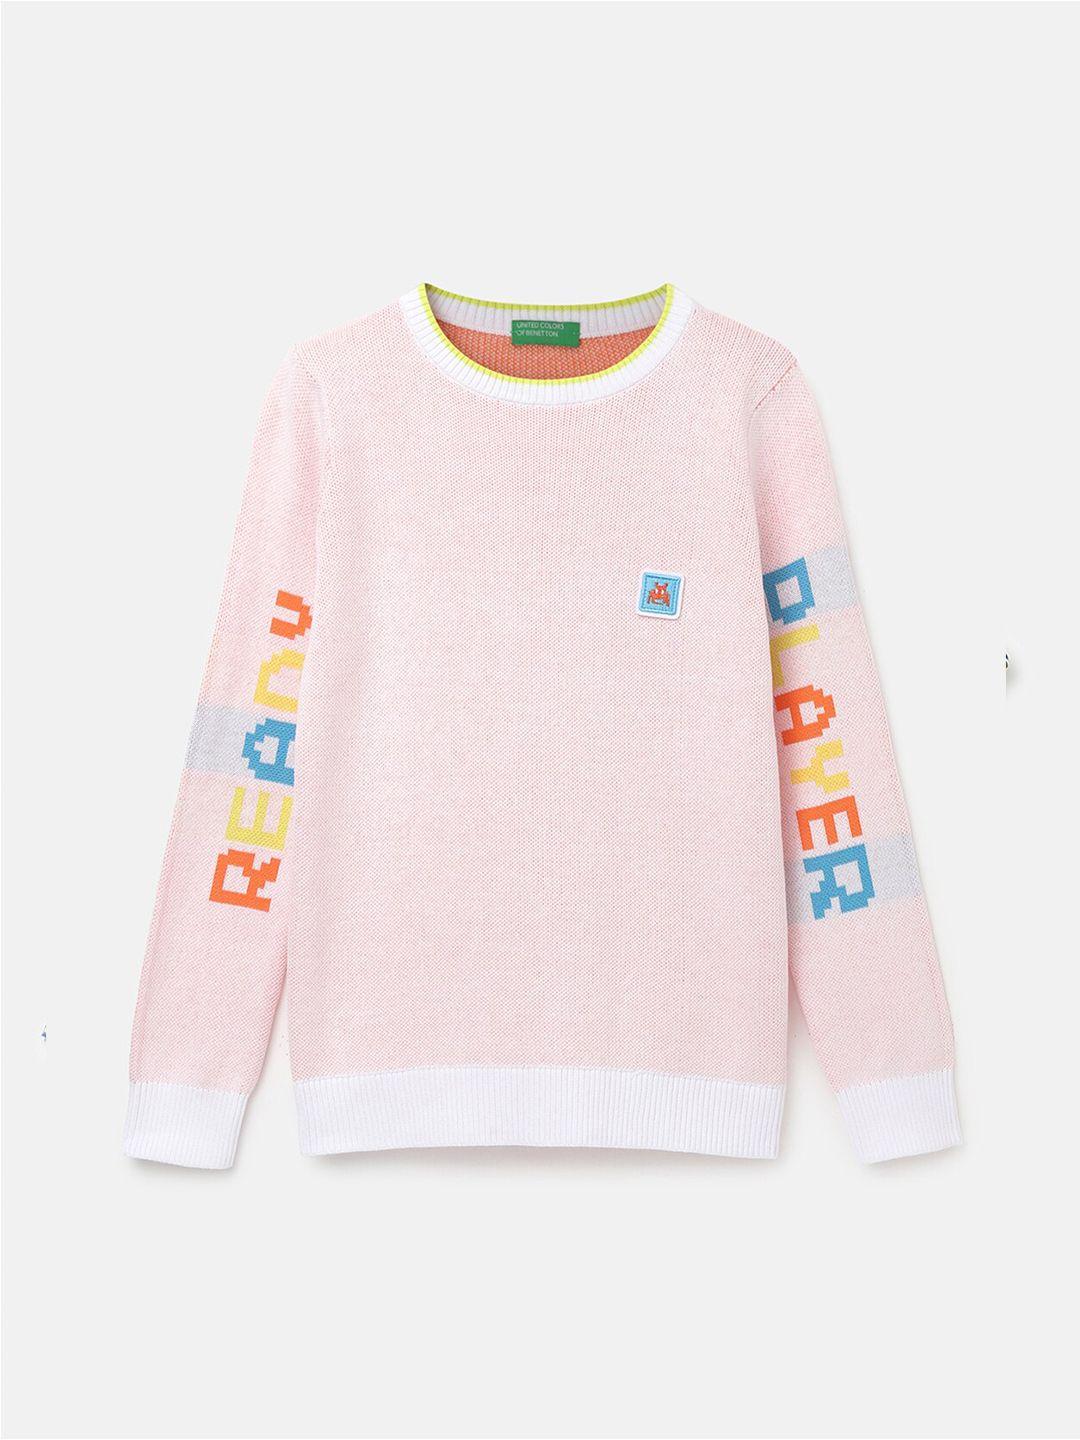 united colors of benetton boys pink & orange typography printed pullover